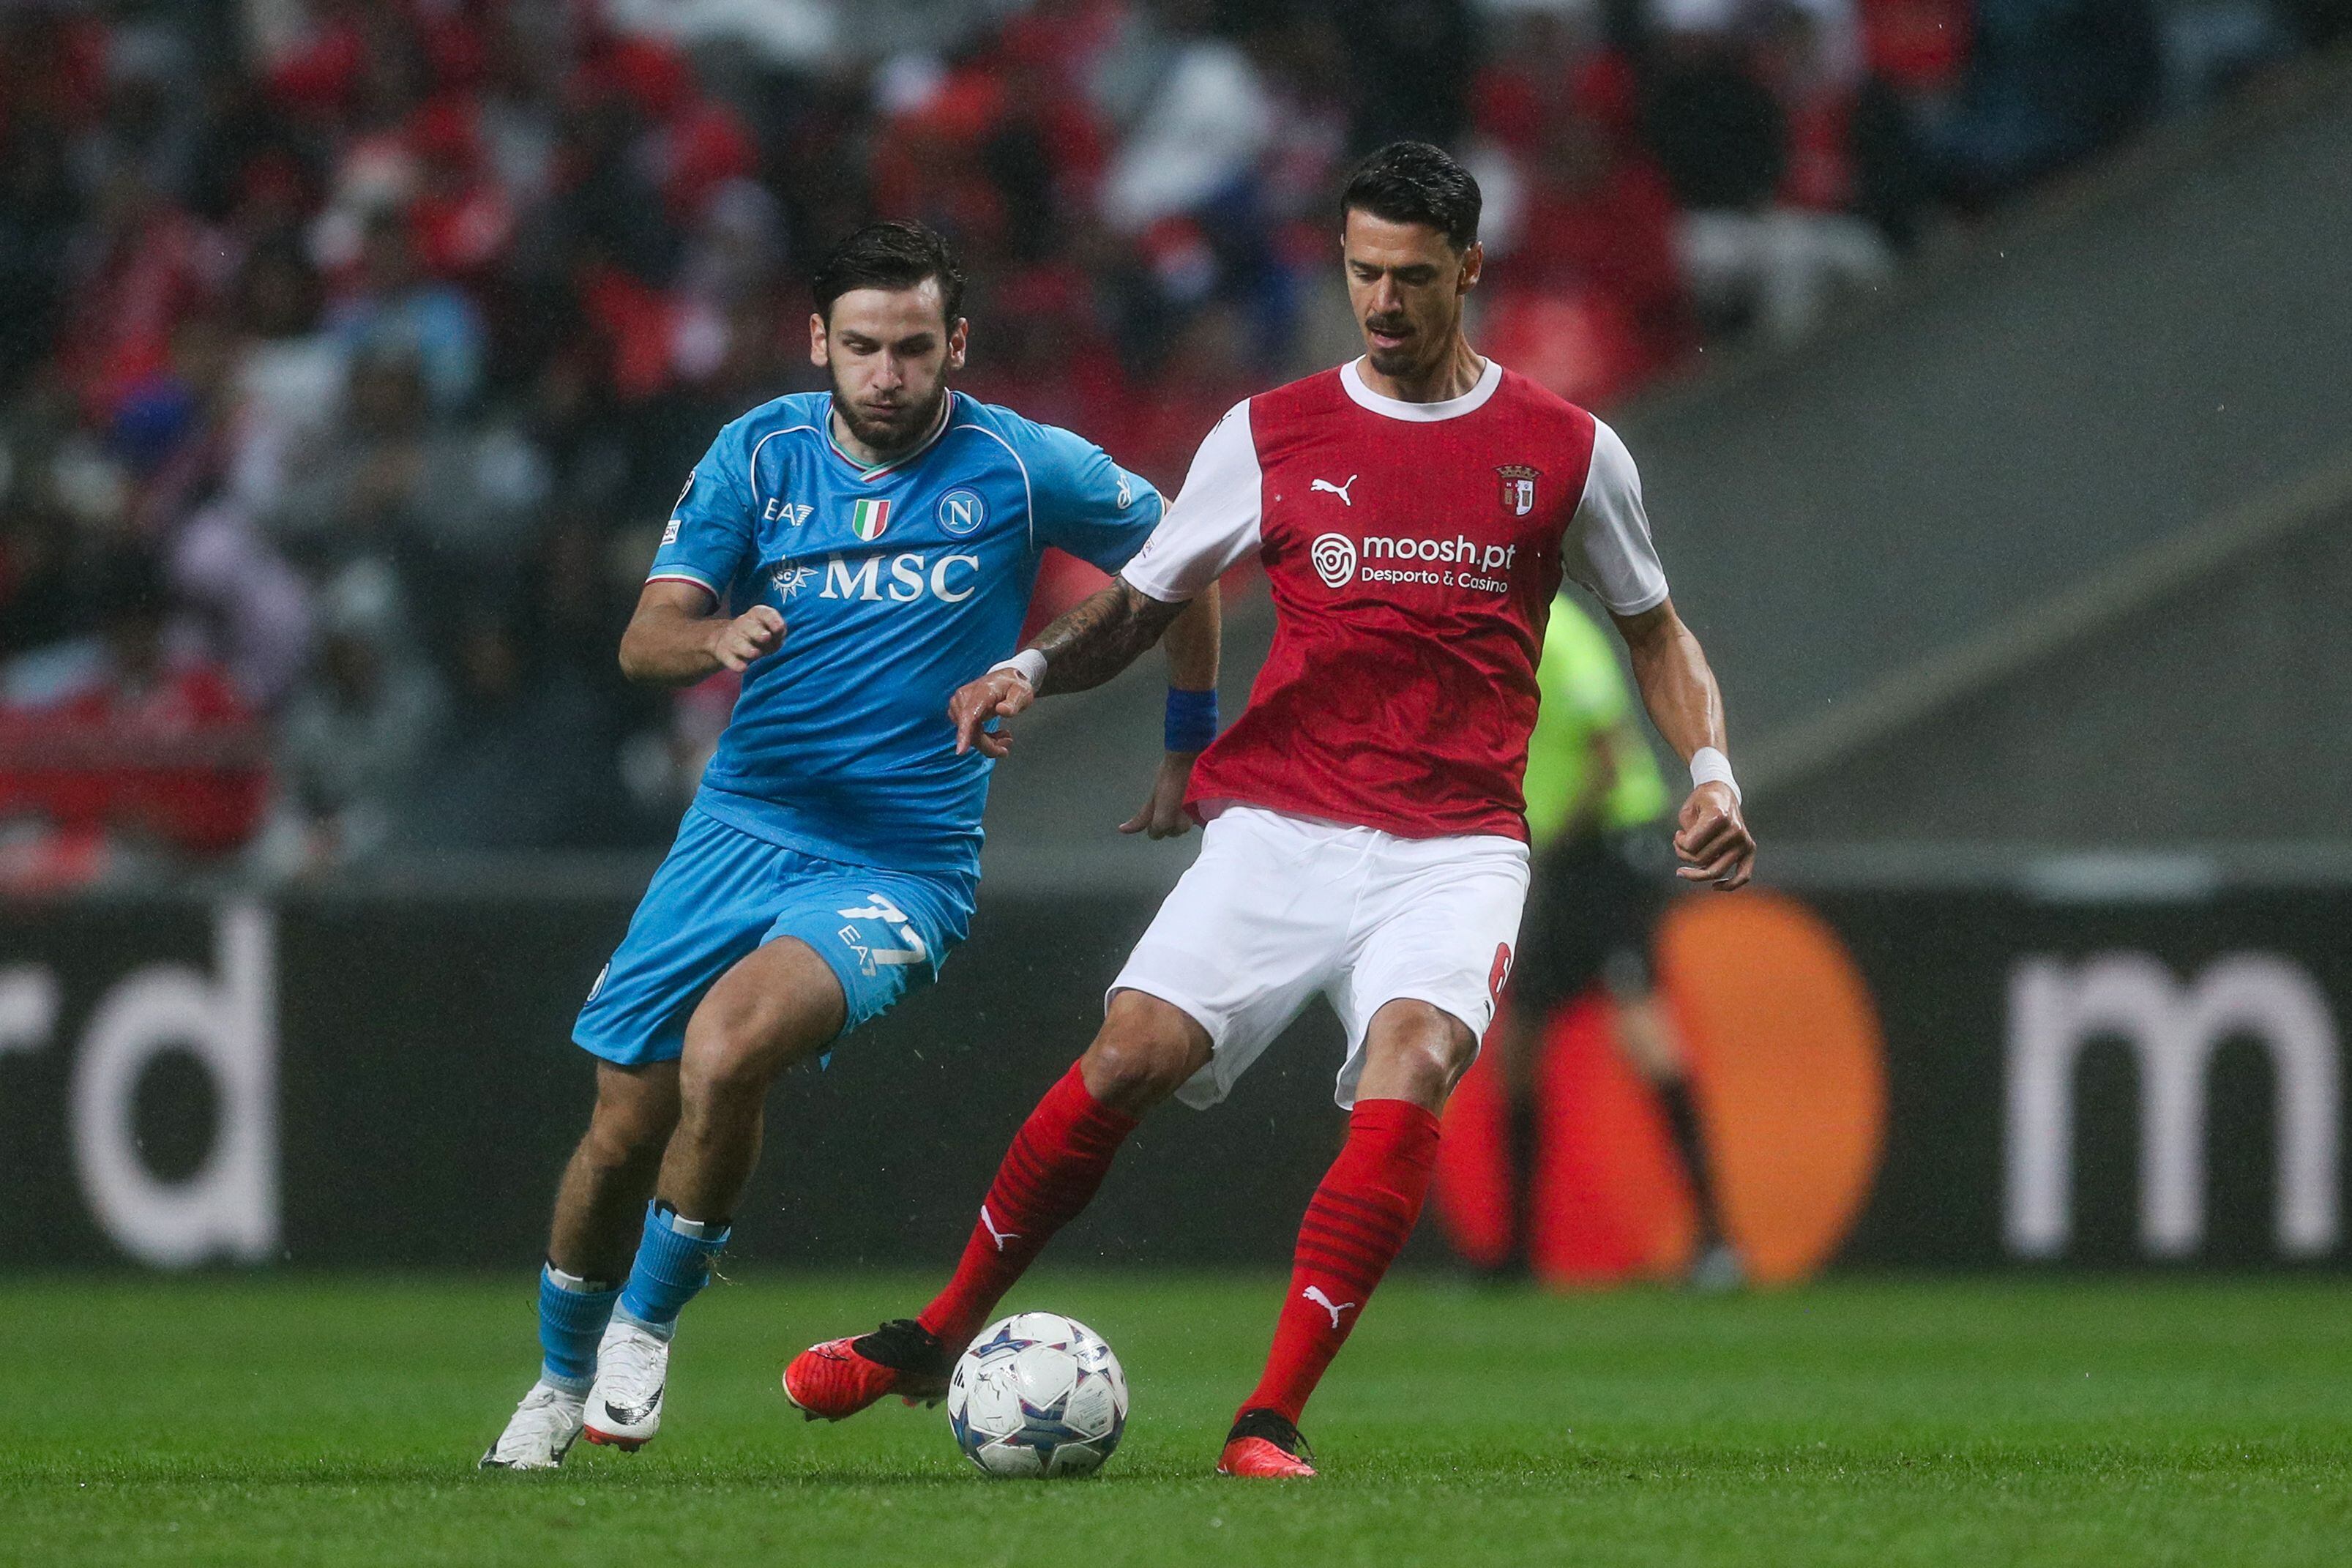 Napoli's Georgian forward #77 Khvicha Kvaratskhelia (L) fights for the ball with Sporting Braga's Portuguese defender #06 Jose Fonte during the UEFA Champions League 1st round day 1 group C football match between SC Braga and Napoli at the Municipal stadium of Braga on September 20, 2023. (Photo by CARLOS COSTA / AFP)